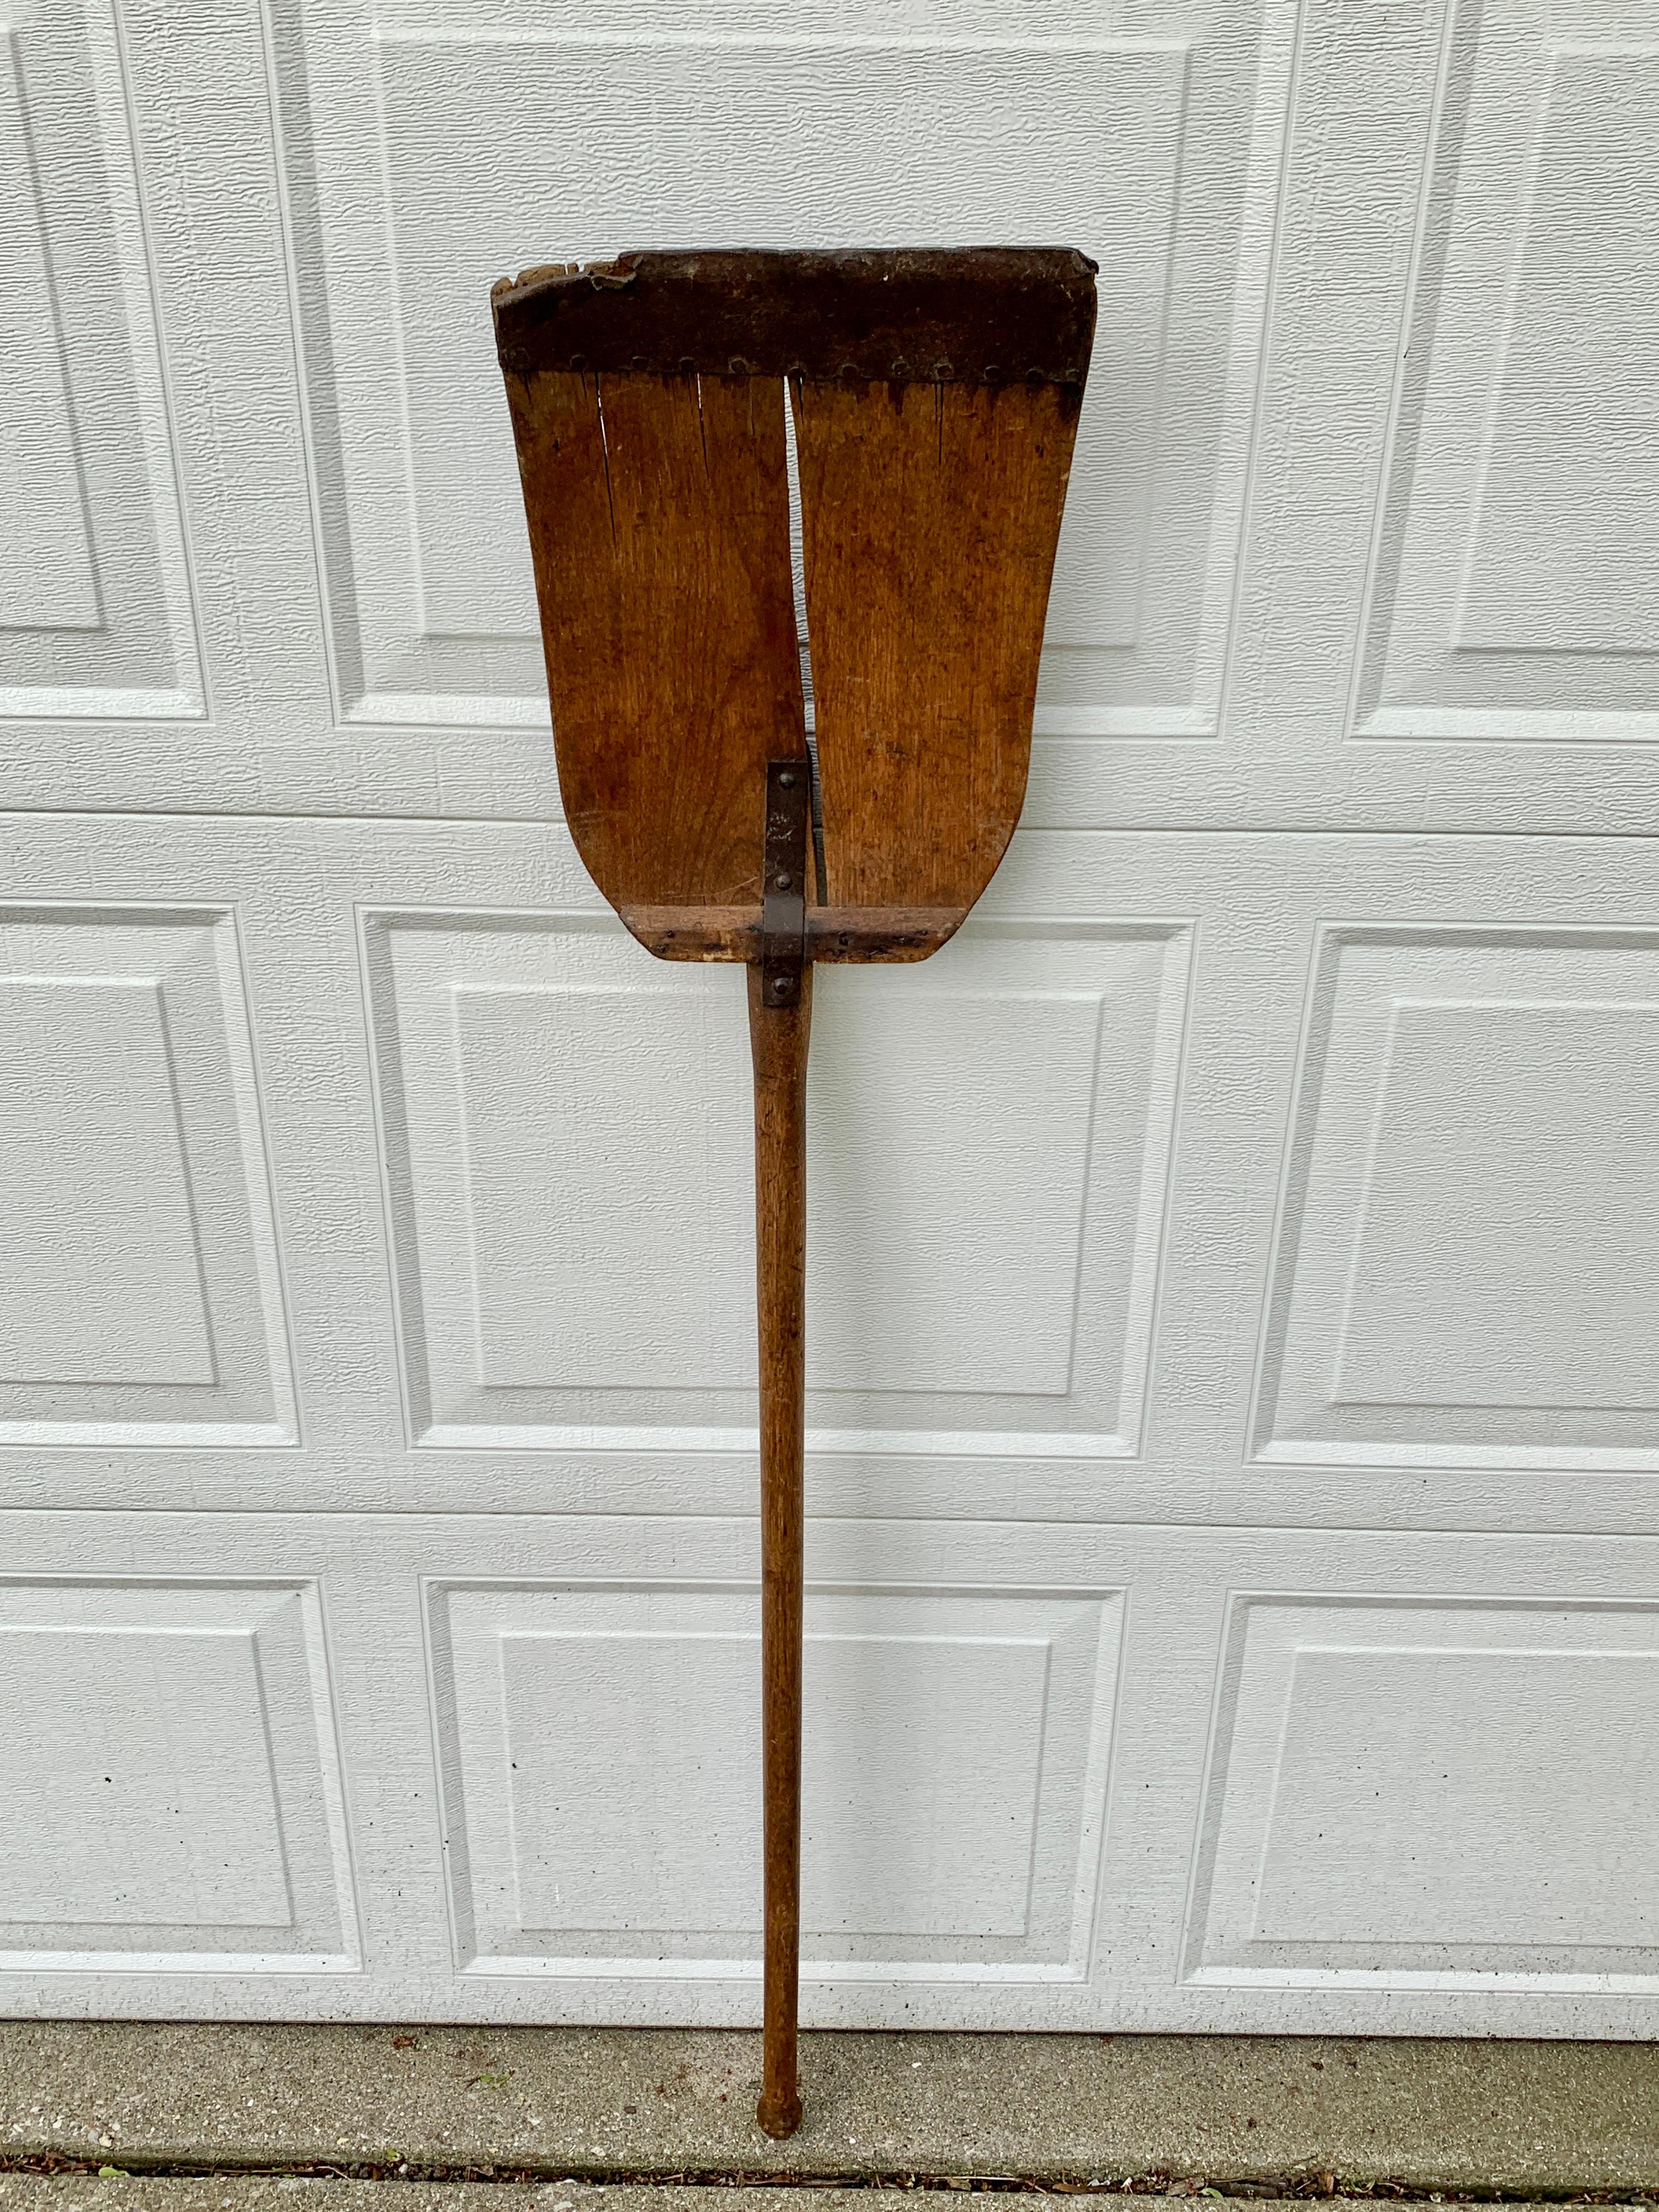 A beautiful antique rustic, farmhouse, or country wooden handmade grain shovel. This would be ideal for an installation on a large wall on a custom wall mount. 

USA, circa late 19th century

Measures: 11.5